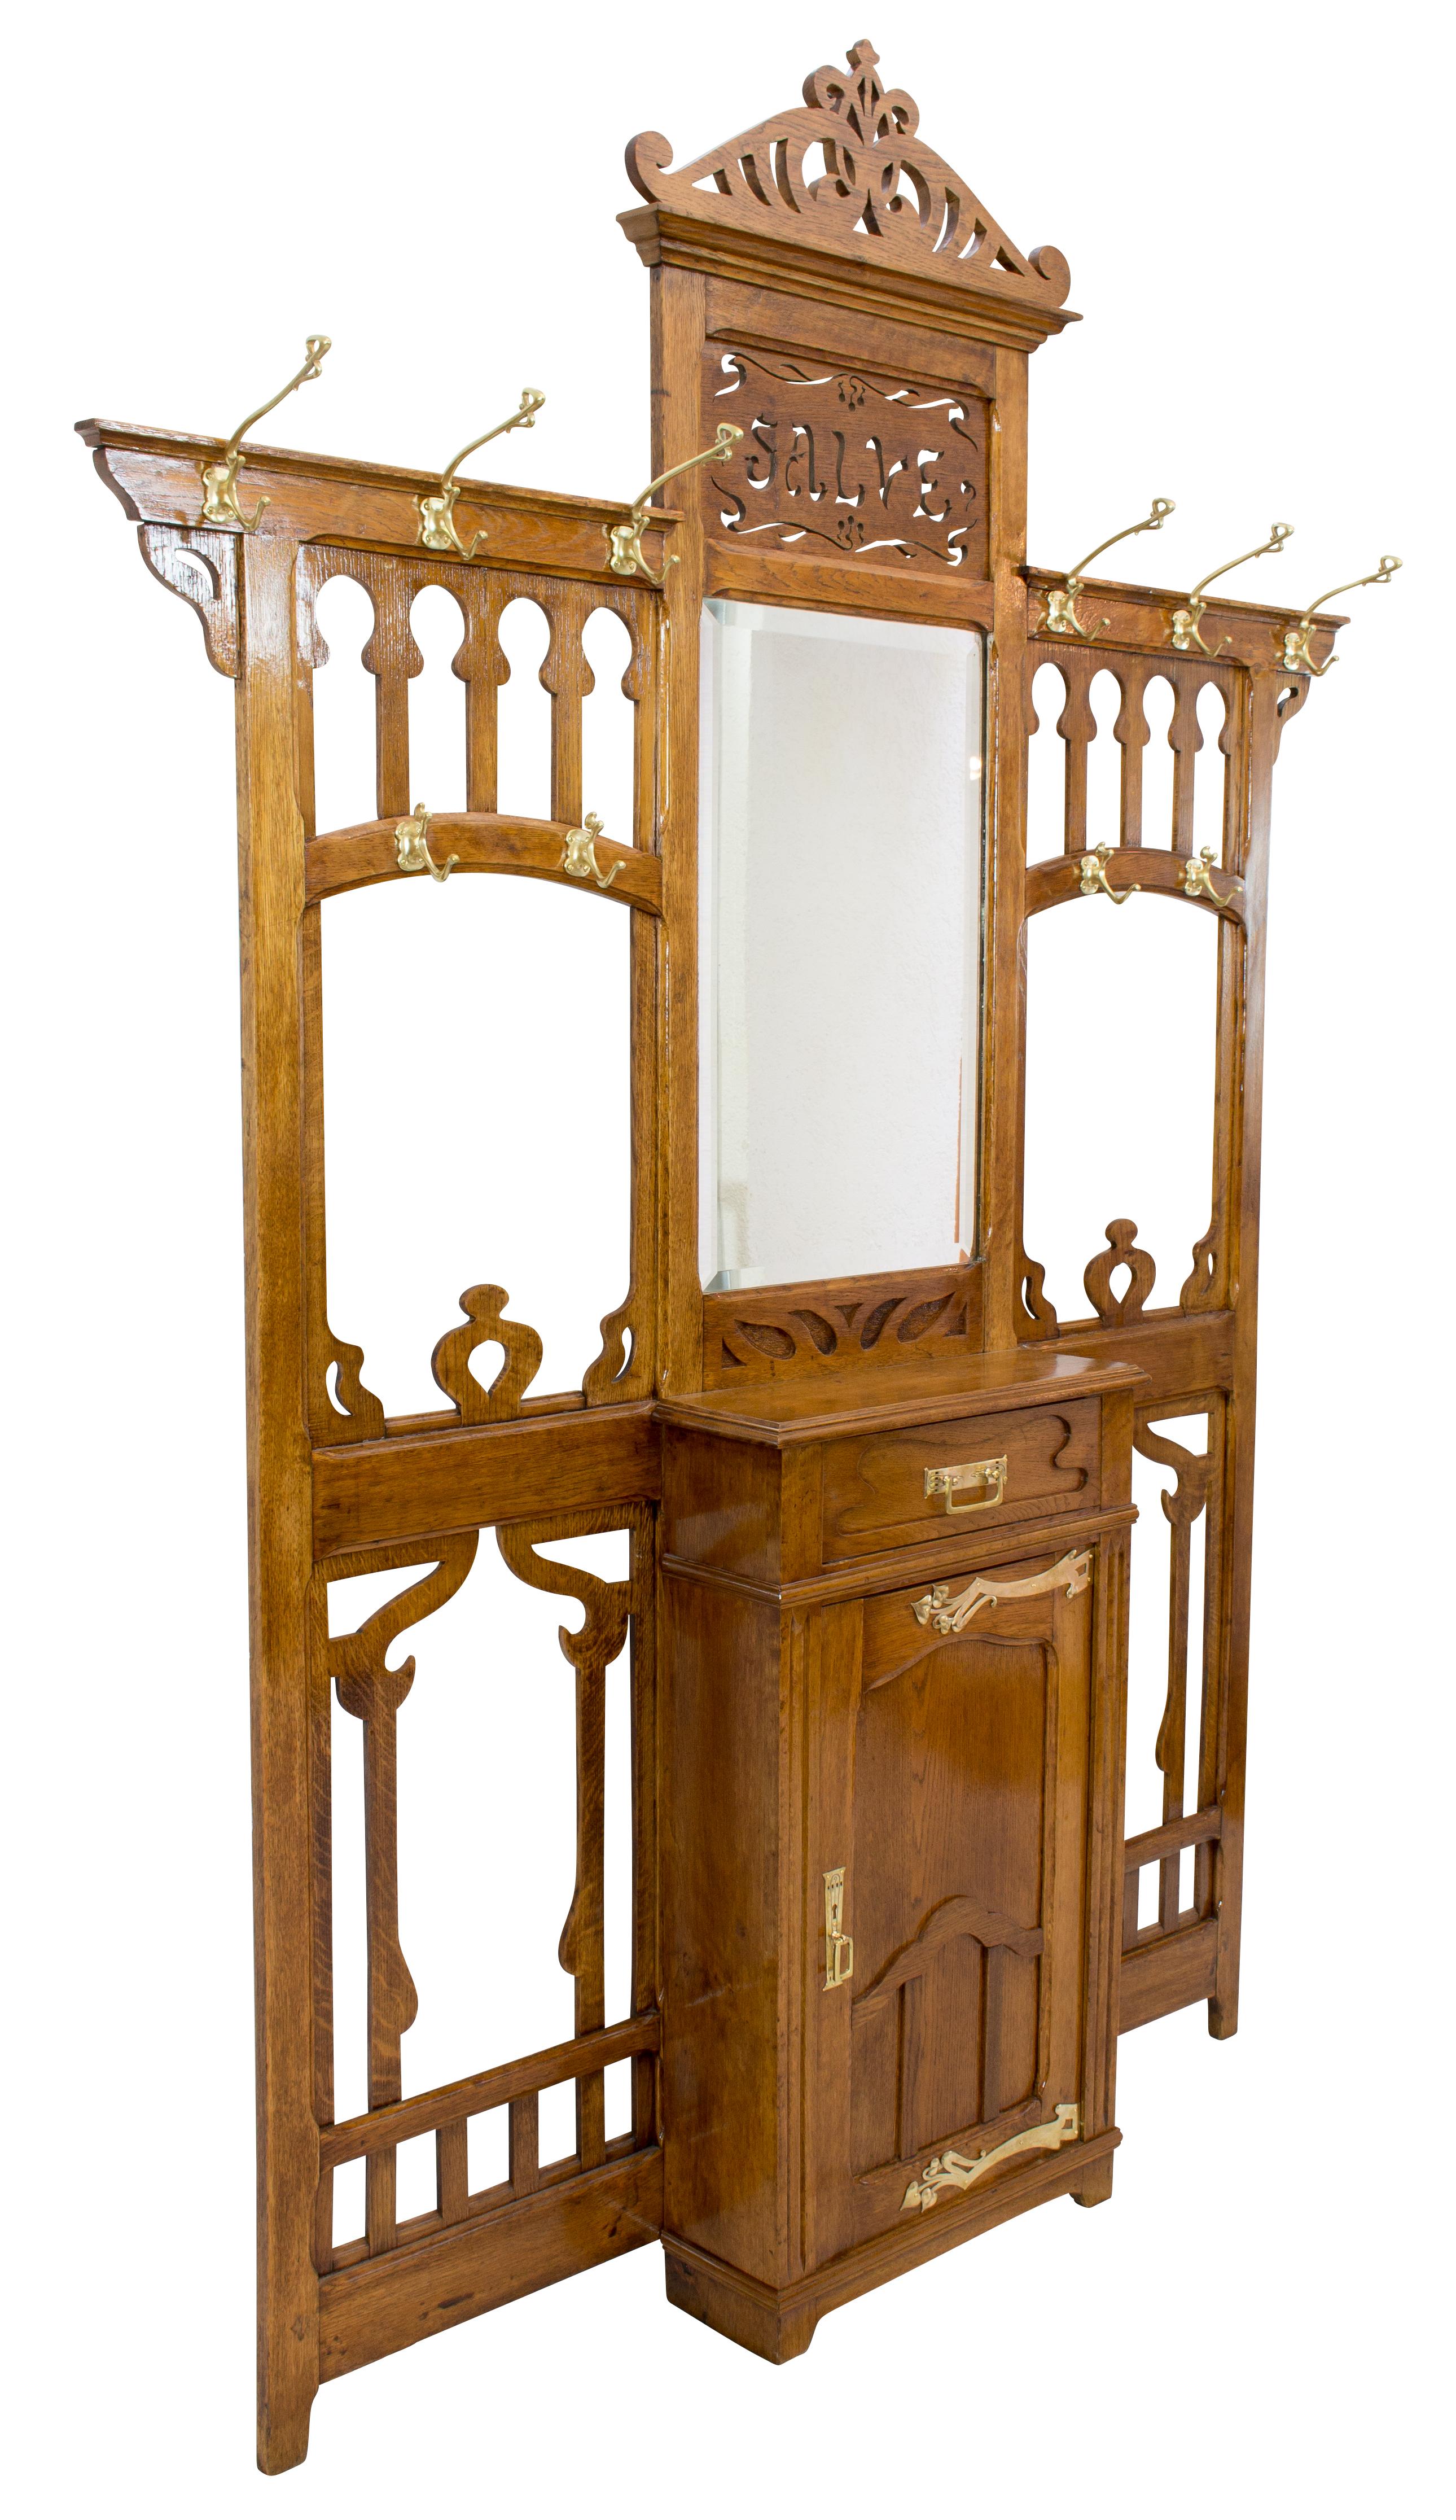 Very beautiful imposing wall wardrobe from the Art Nouveau period end of the 19th century from France. The wardrobe is made of oakwood and covered with original floral brass applications, fittings & hooks. The mirror with a facet cut dates from that